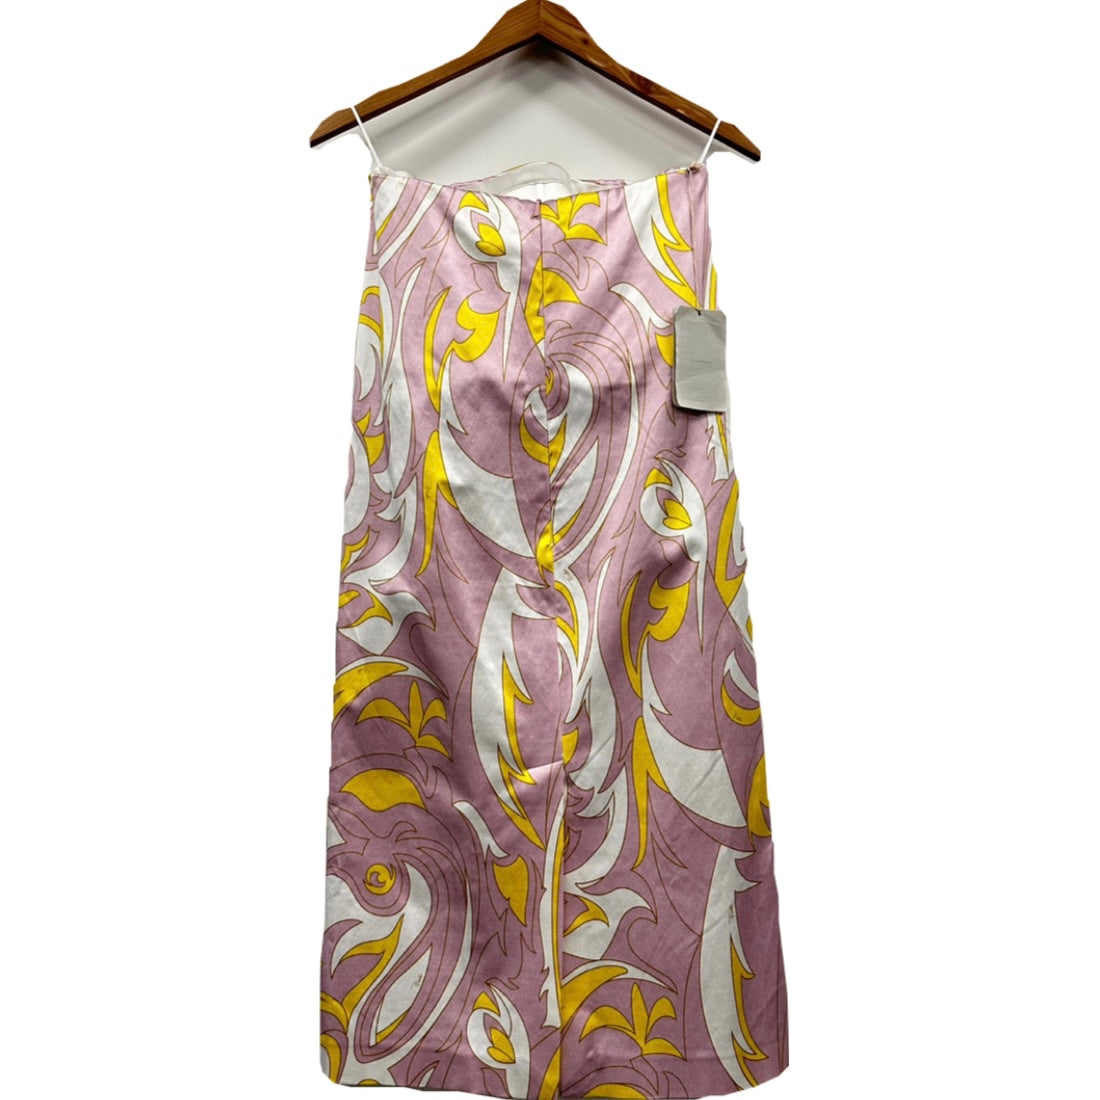 Emilio Pucci Strapless Printed Dress - Size 38=4 Small – shopstyle360